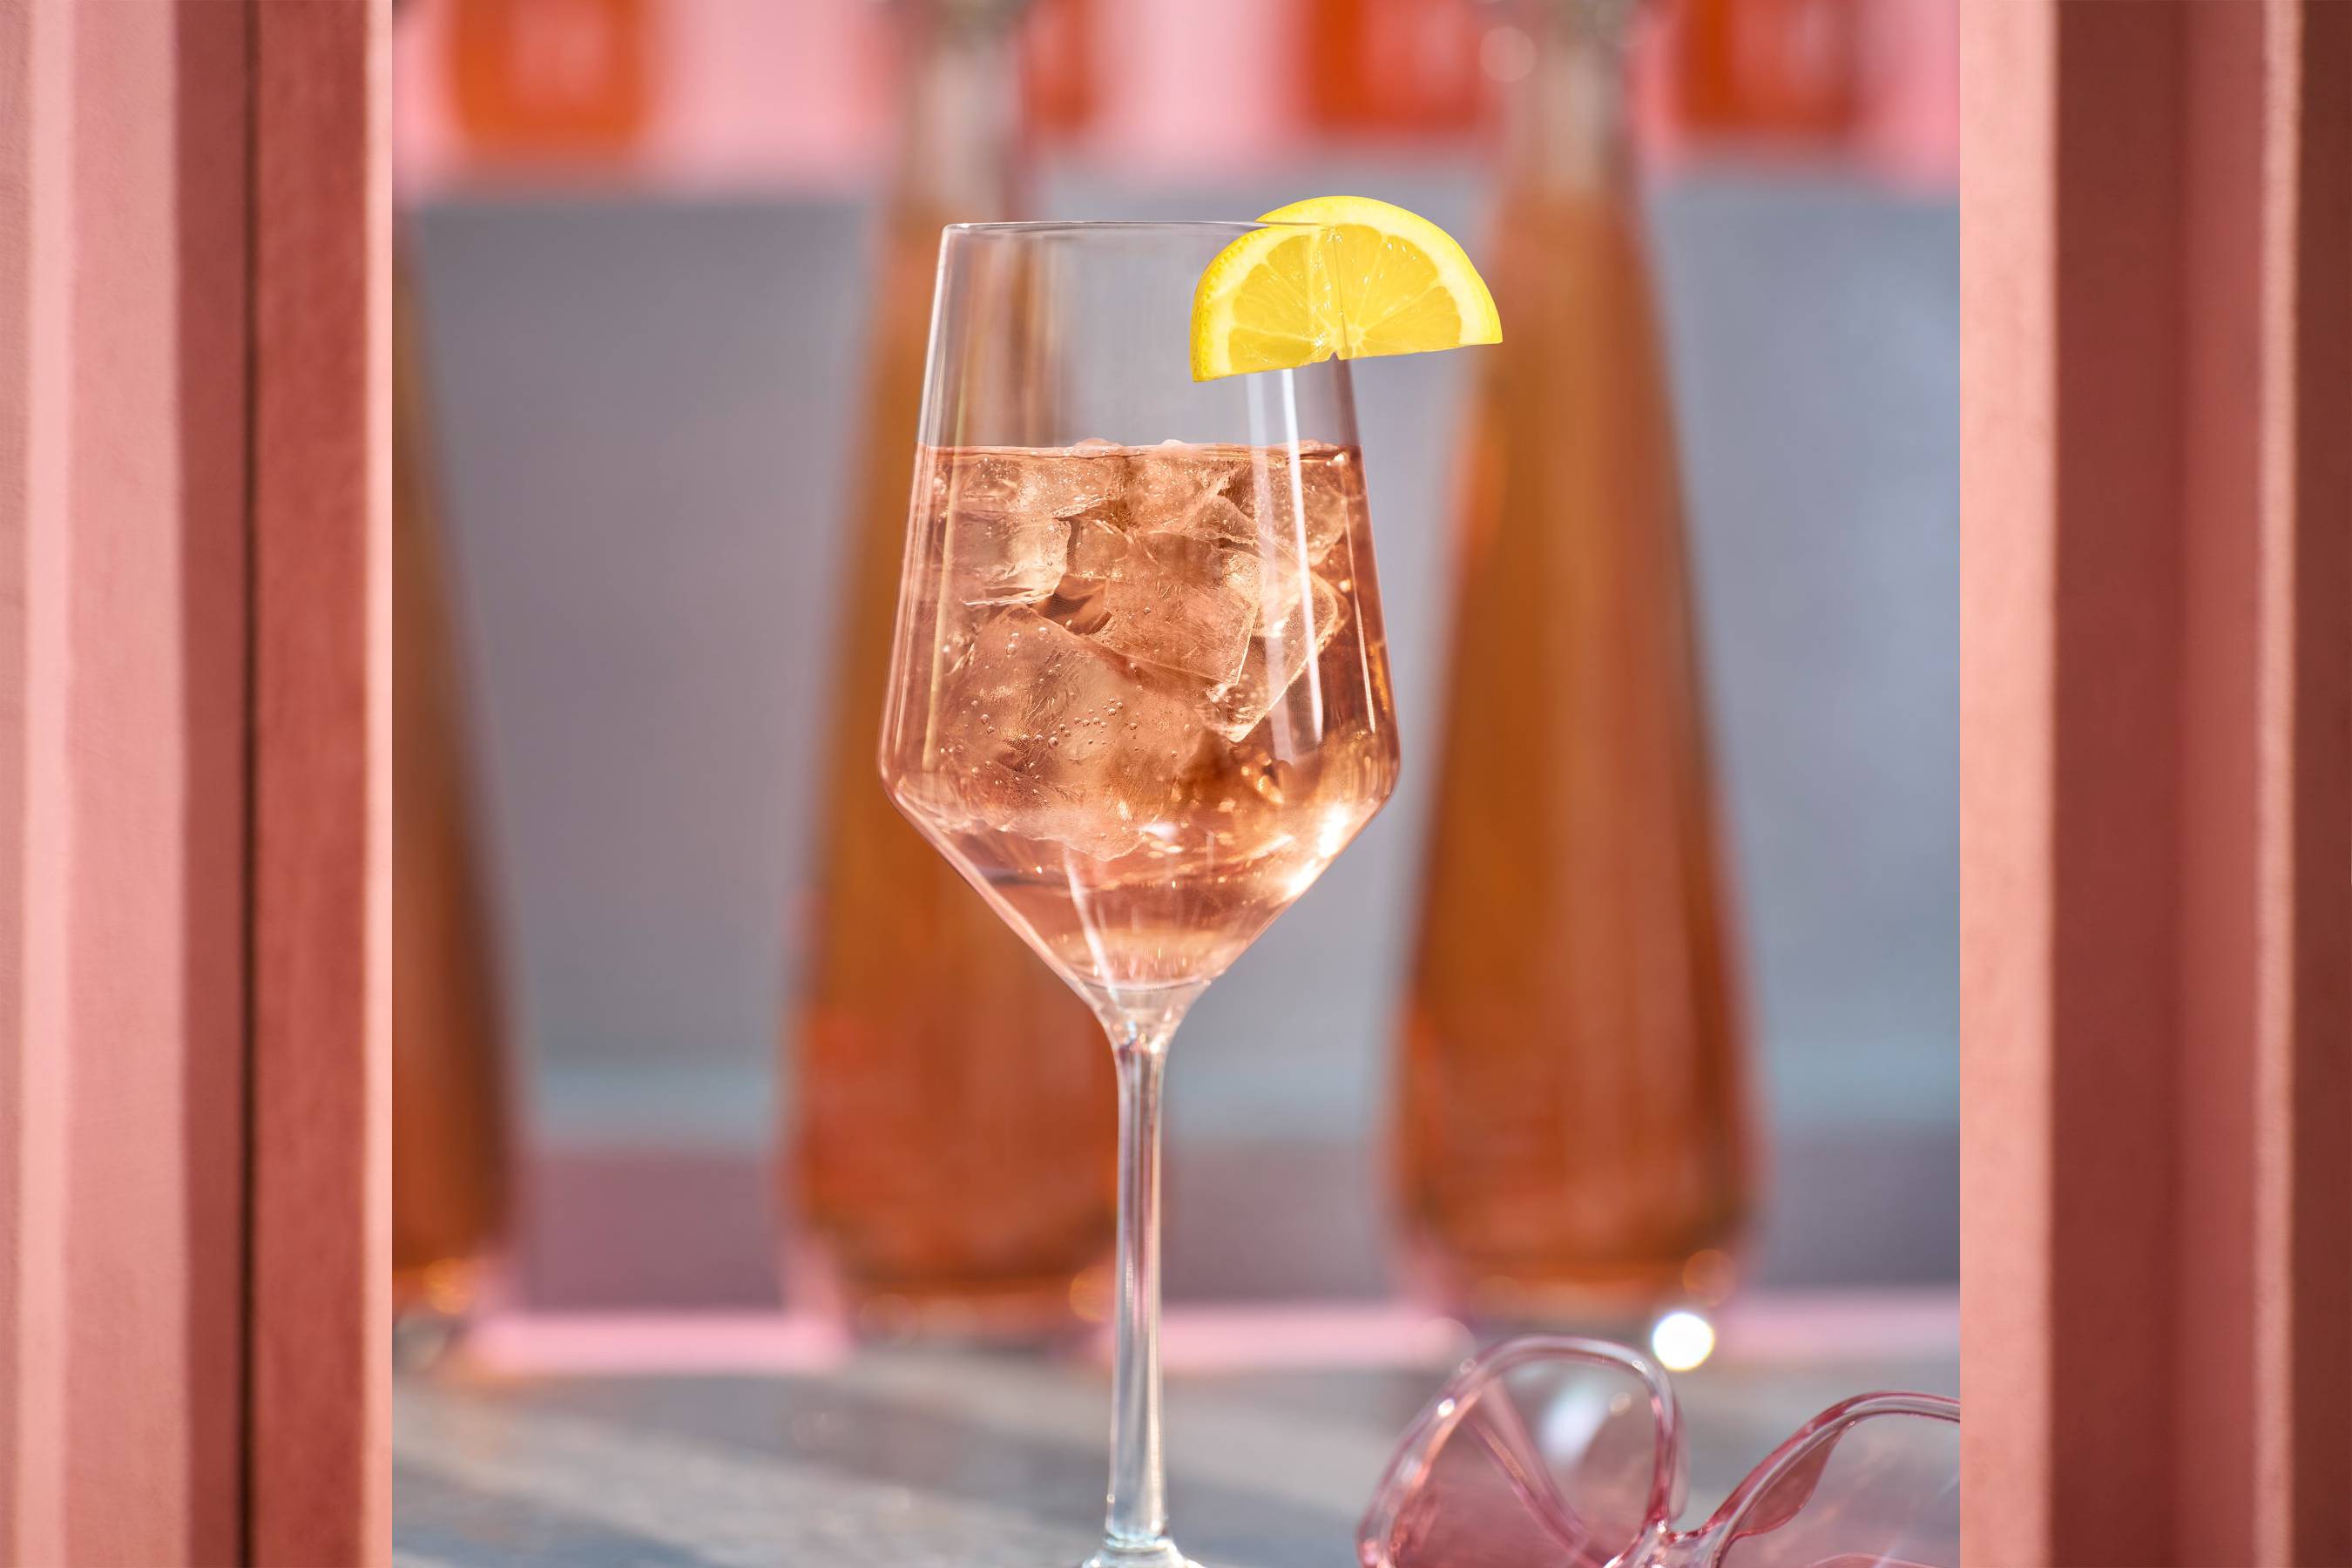 Tequila Don Julio Rosado is best enjoyed on the rocks or with a splash of sparkling water and lemon garnish.